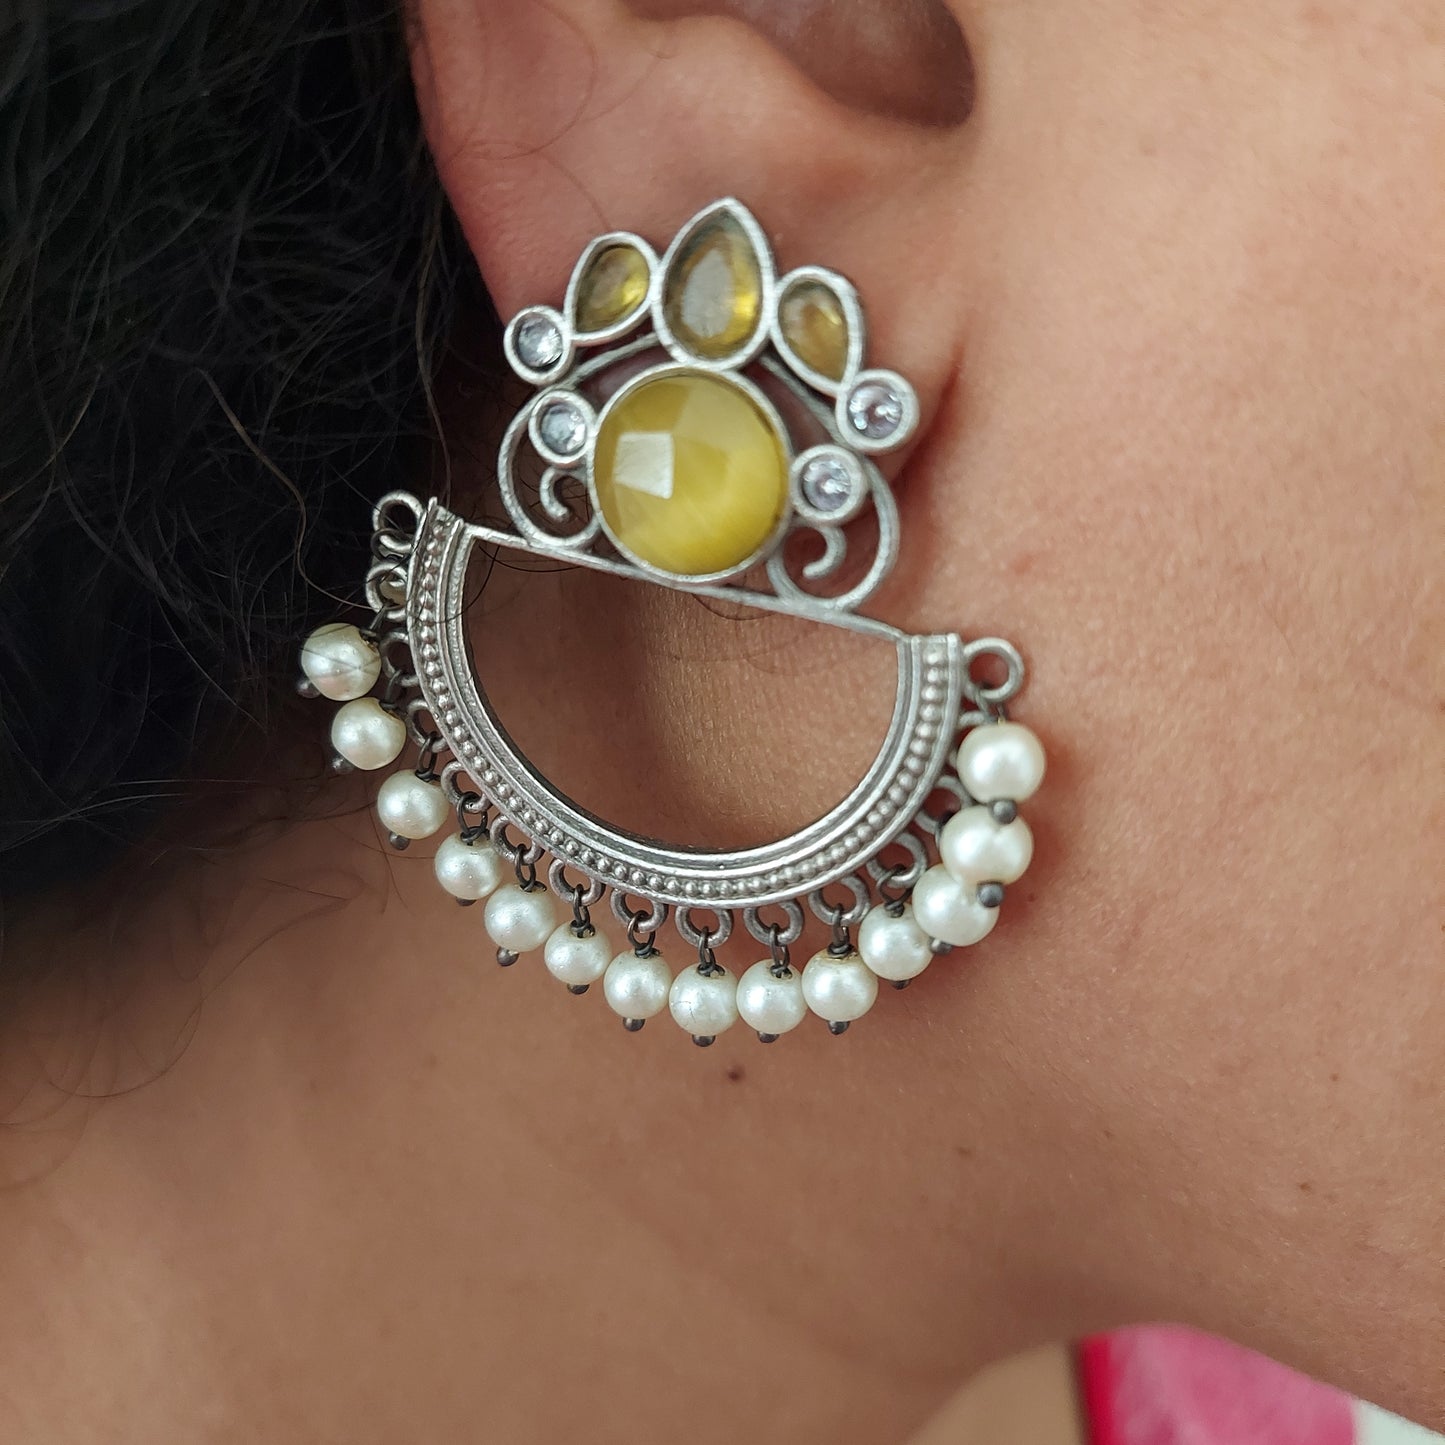 Yellow Stoned Statement Earrings with Pearl Danglers